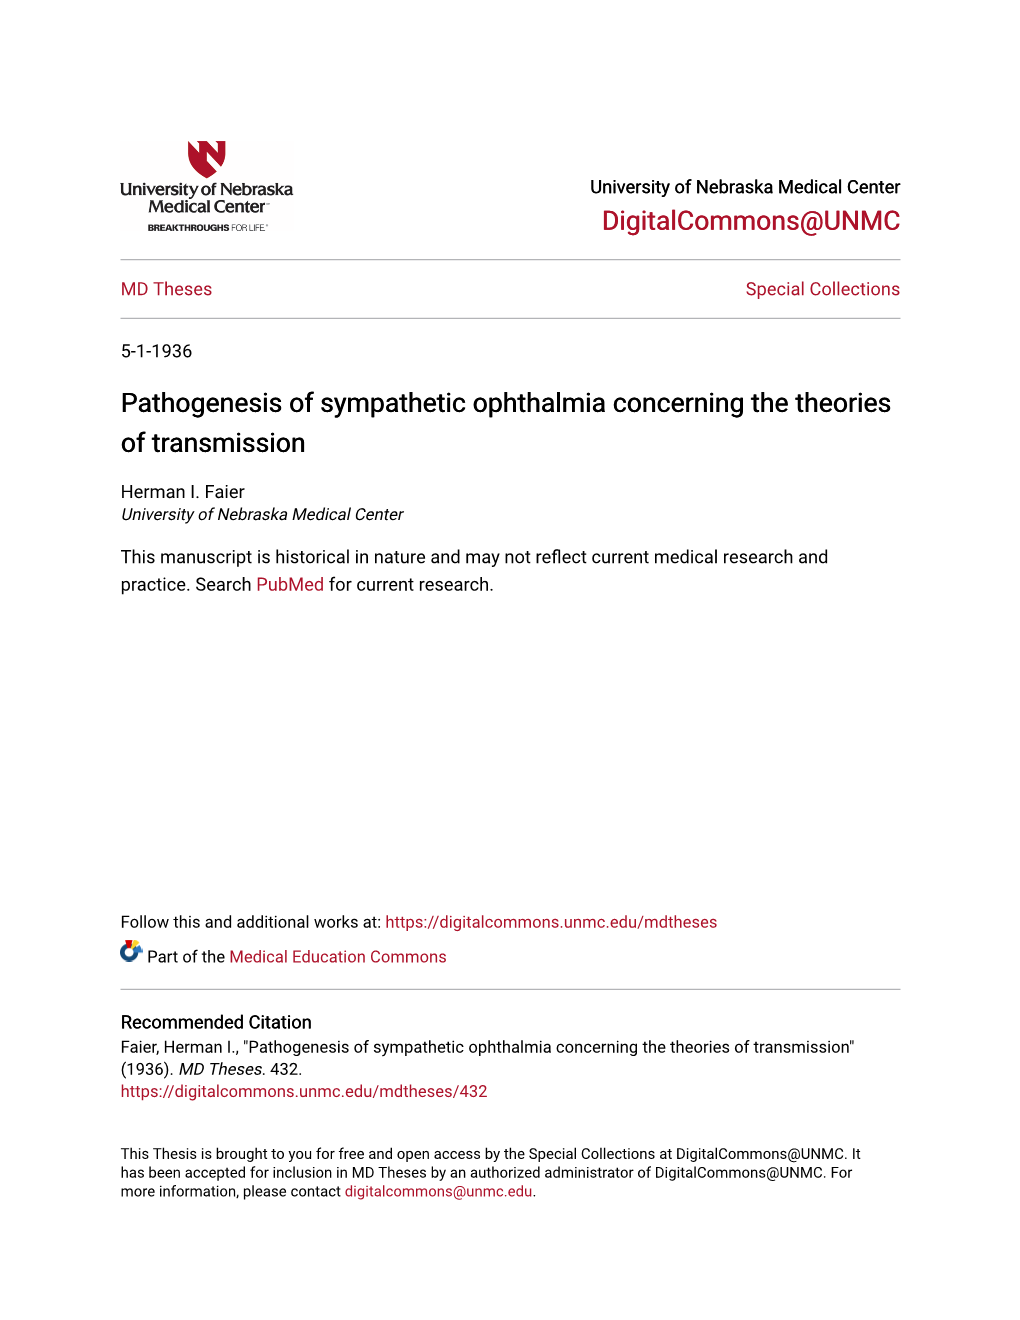 Pathogenesis of Sympathetic Ophthalmia Concerning the Theories of Transmission